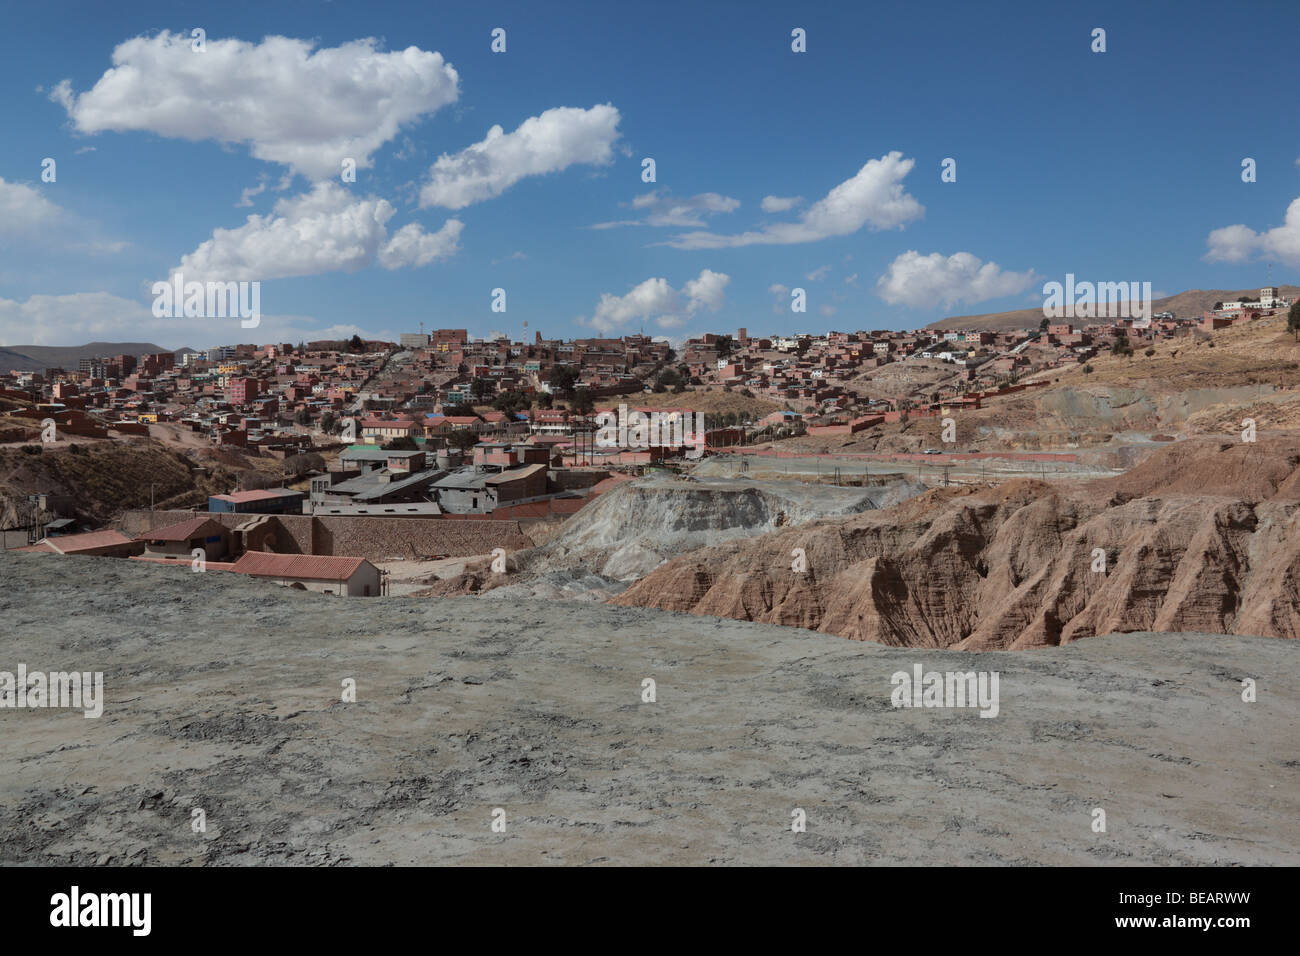 Tailings waste from nearby mines on outskirts of Potosi, suburbs of city in background, Bolivia Stock Photo